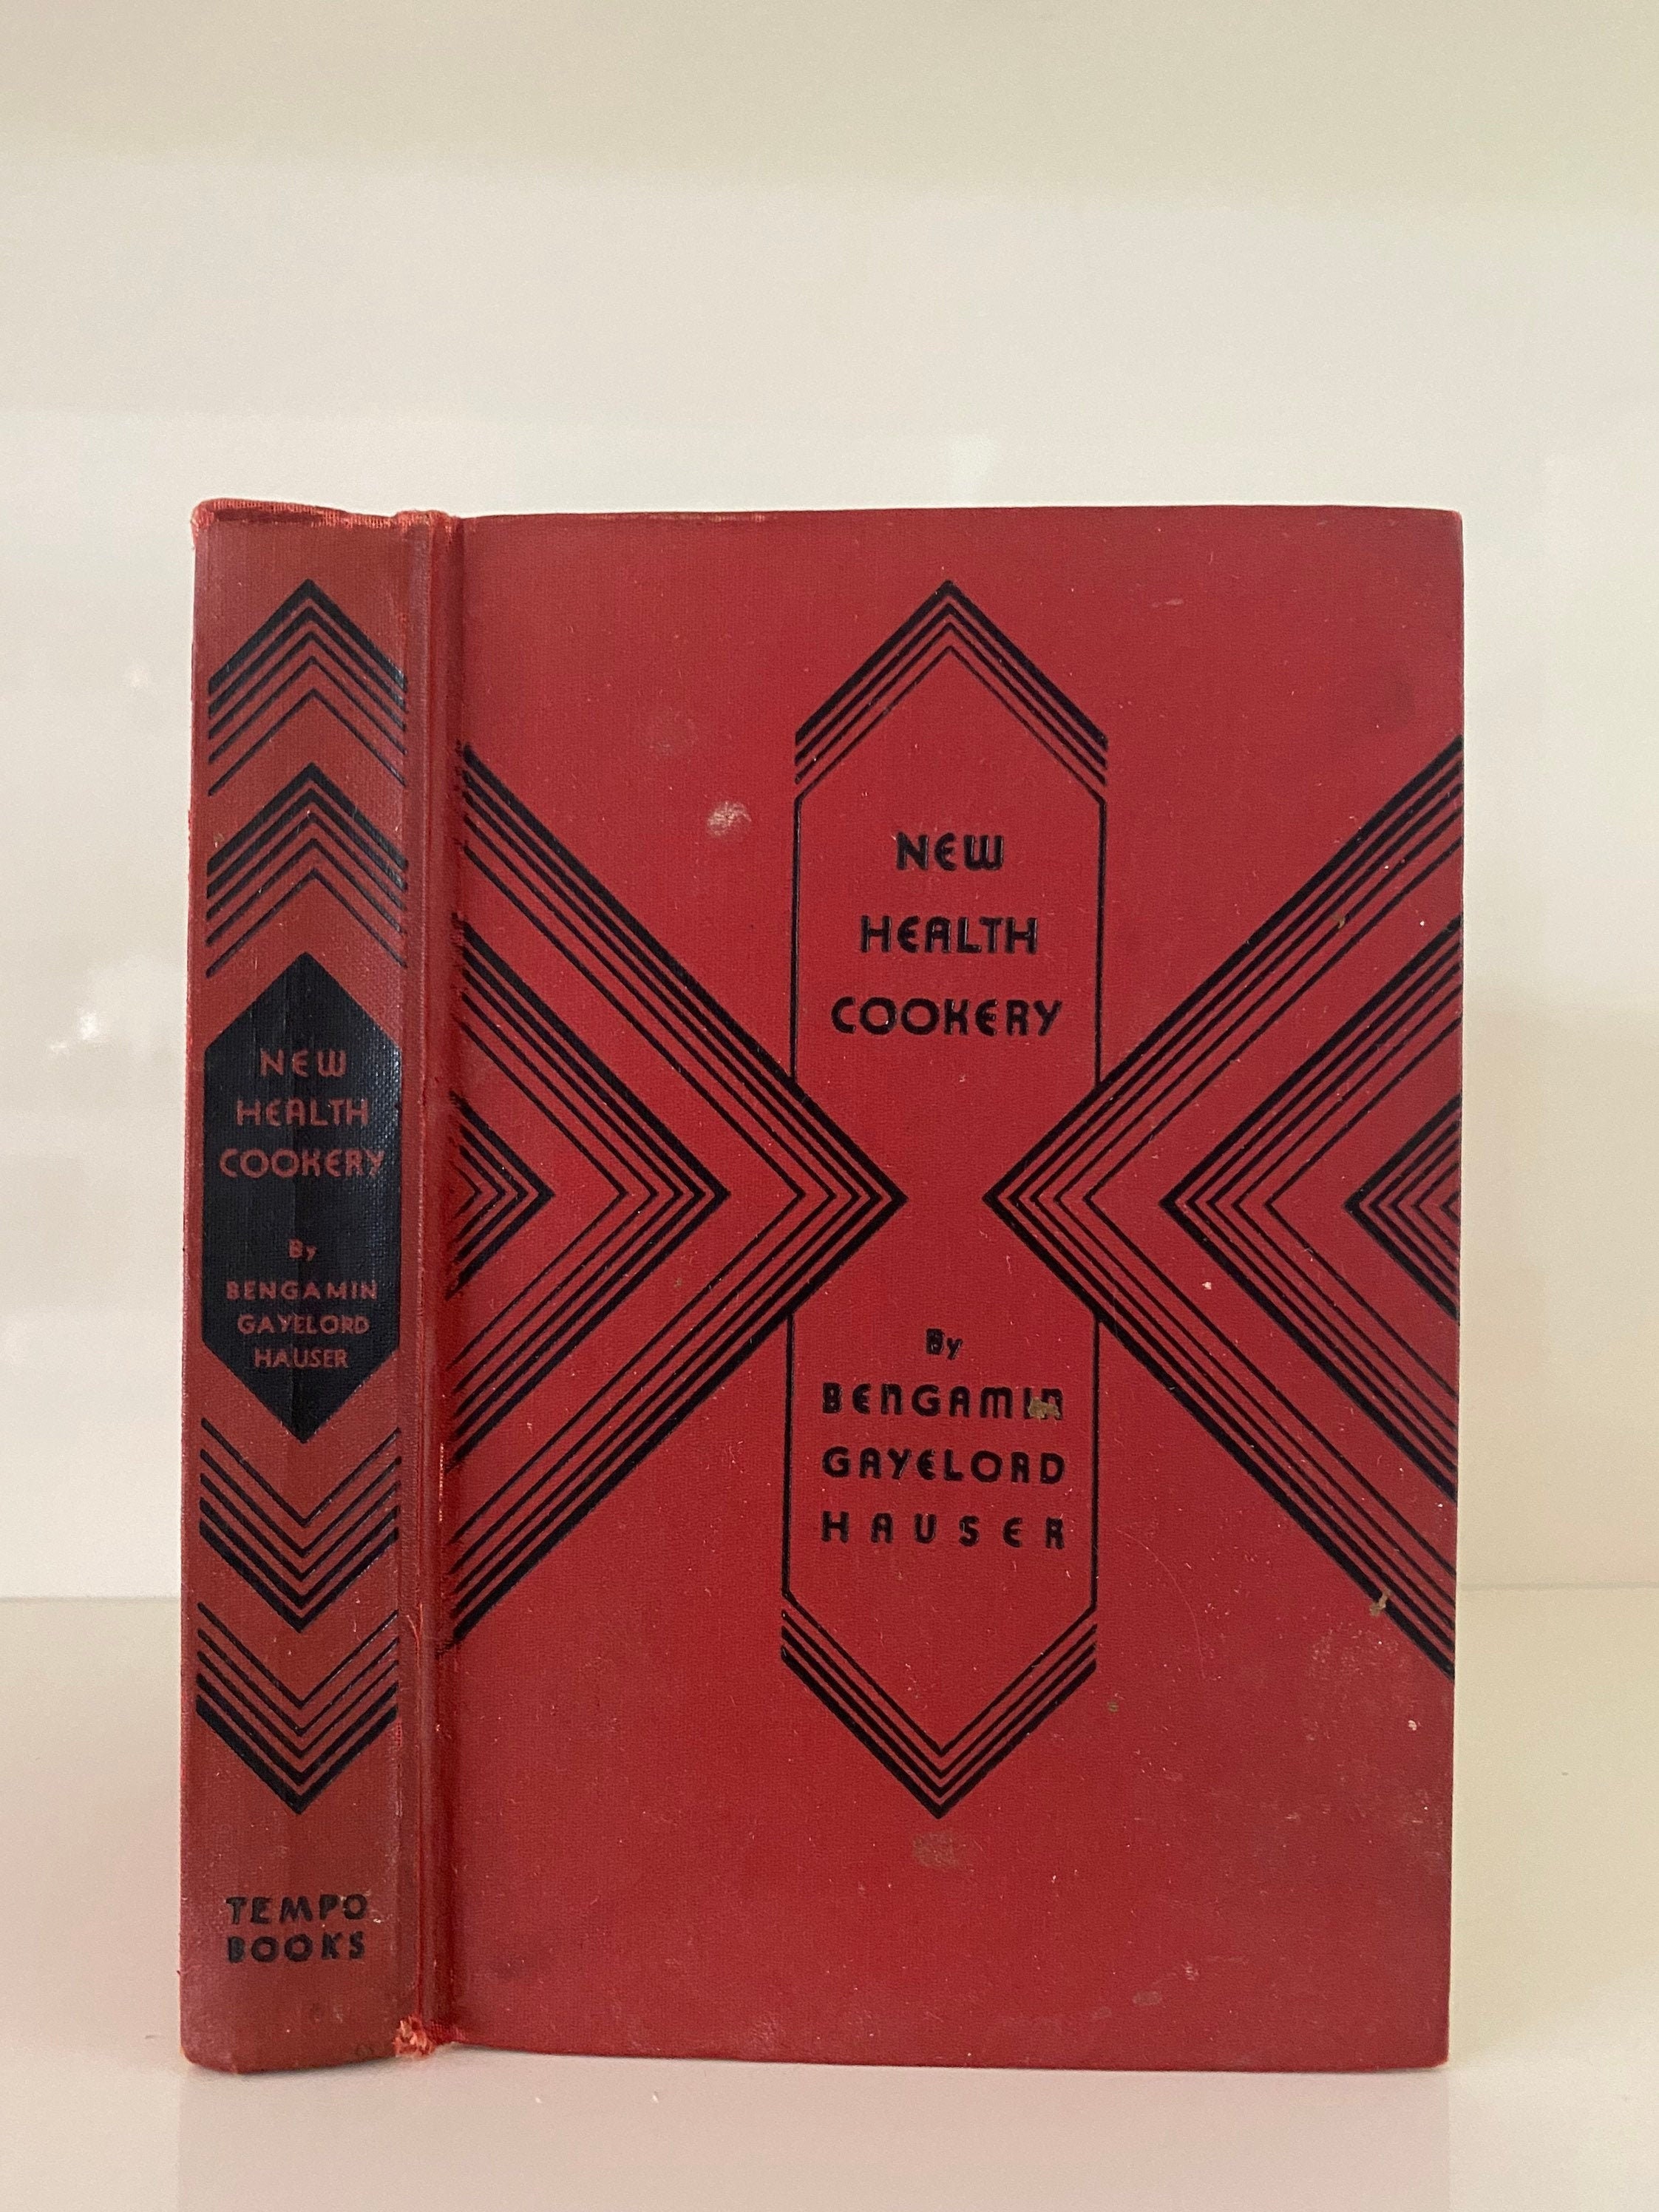 1930 New Health Cookery by Dr. Gayelord Hauser Art Deco